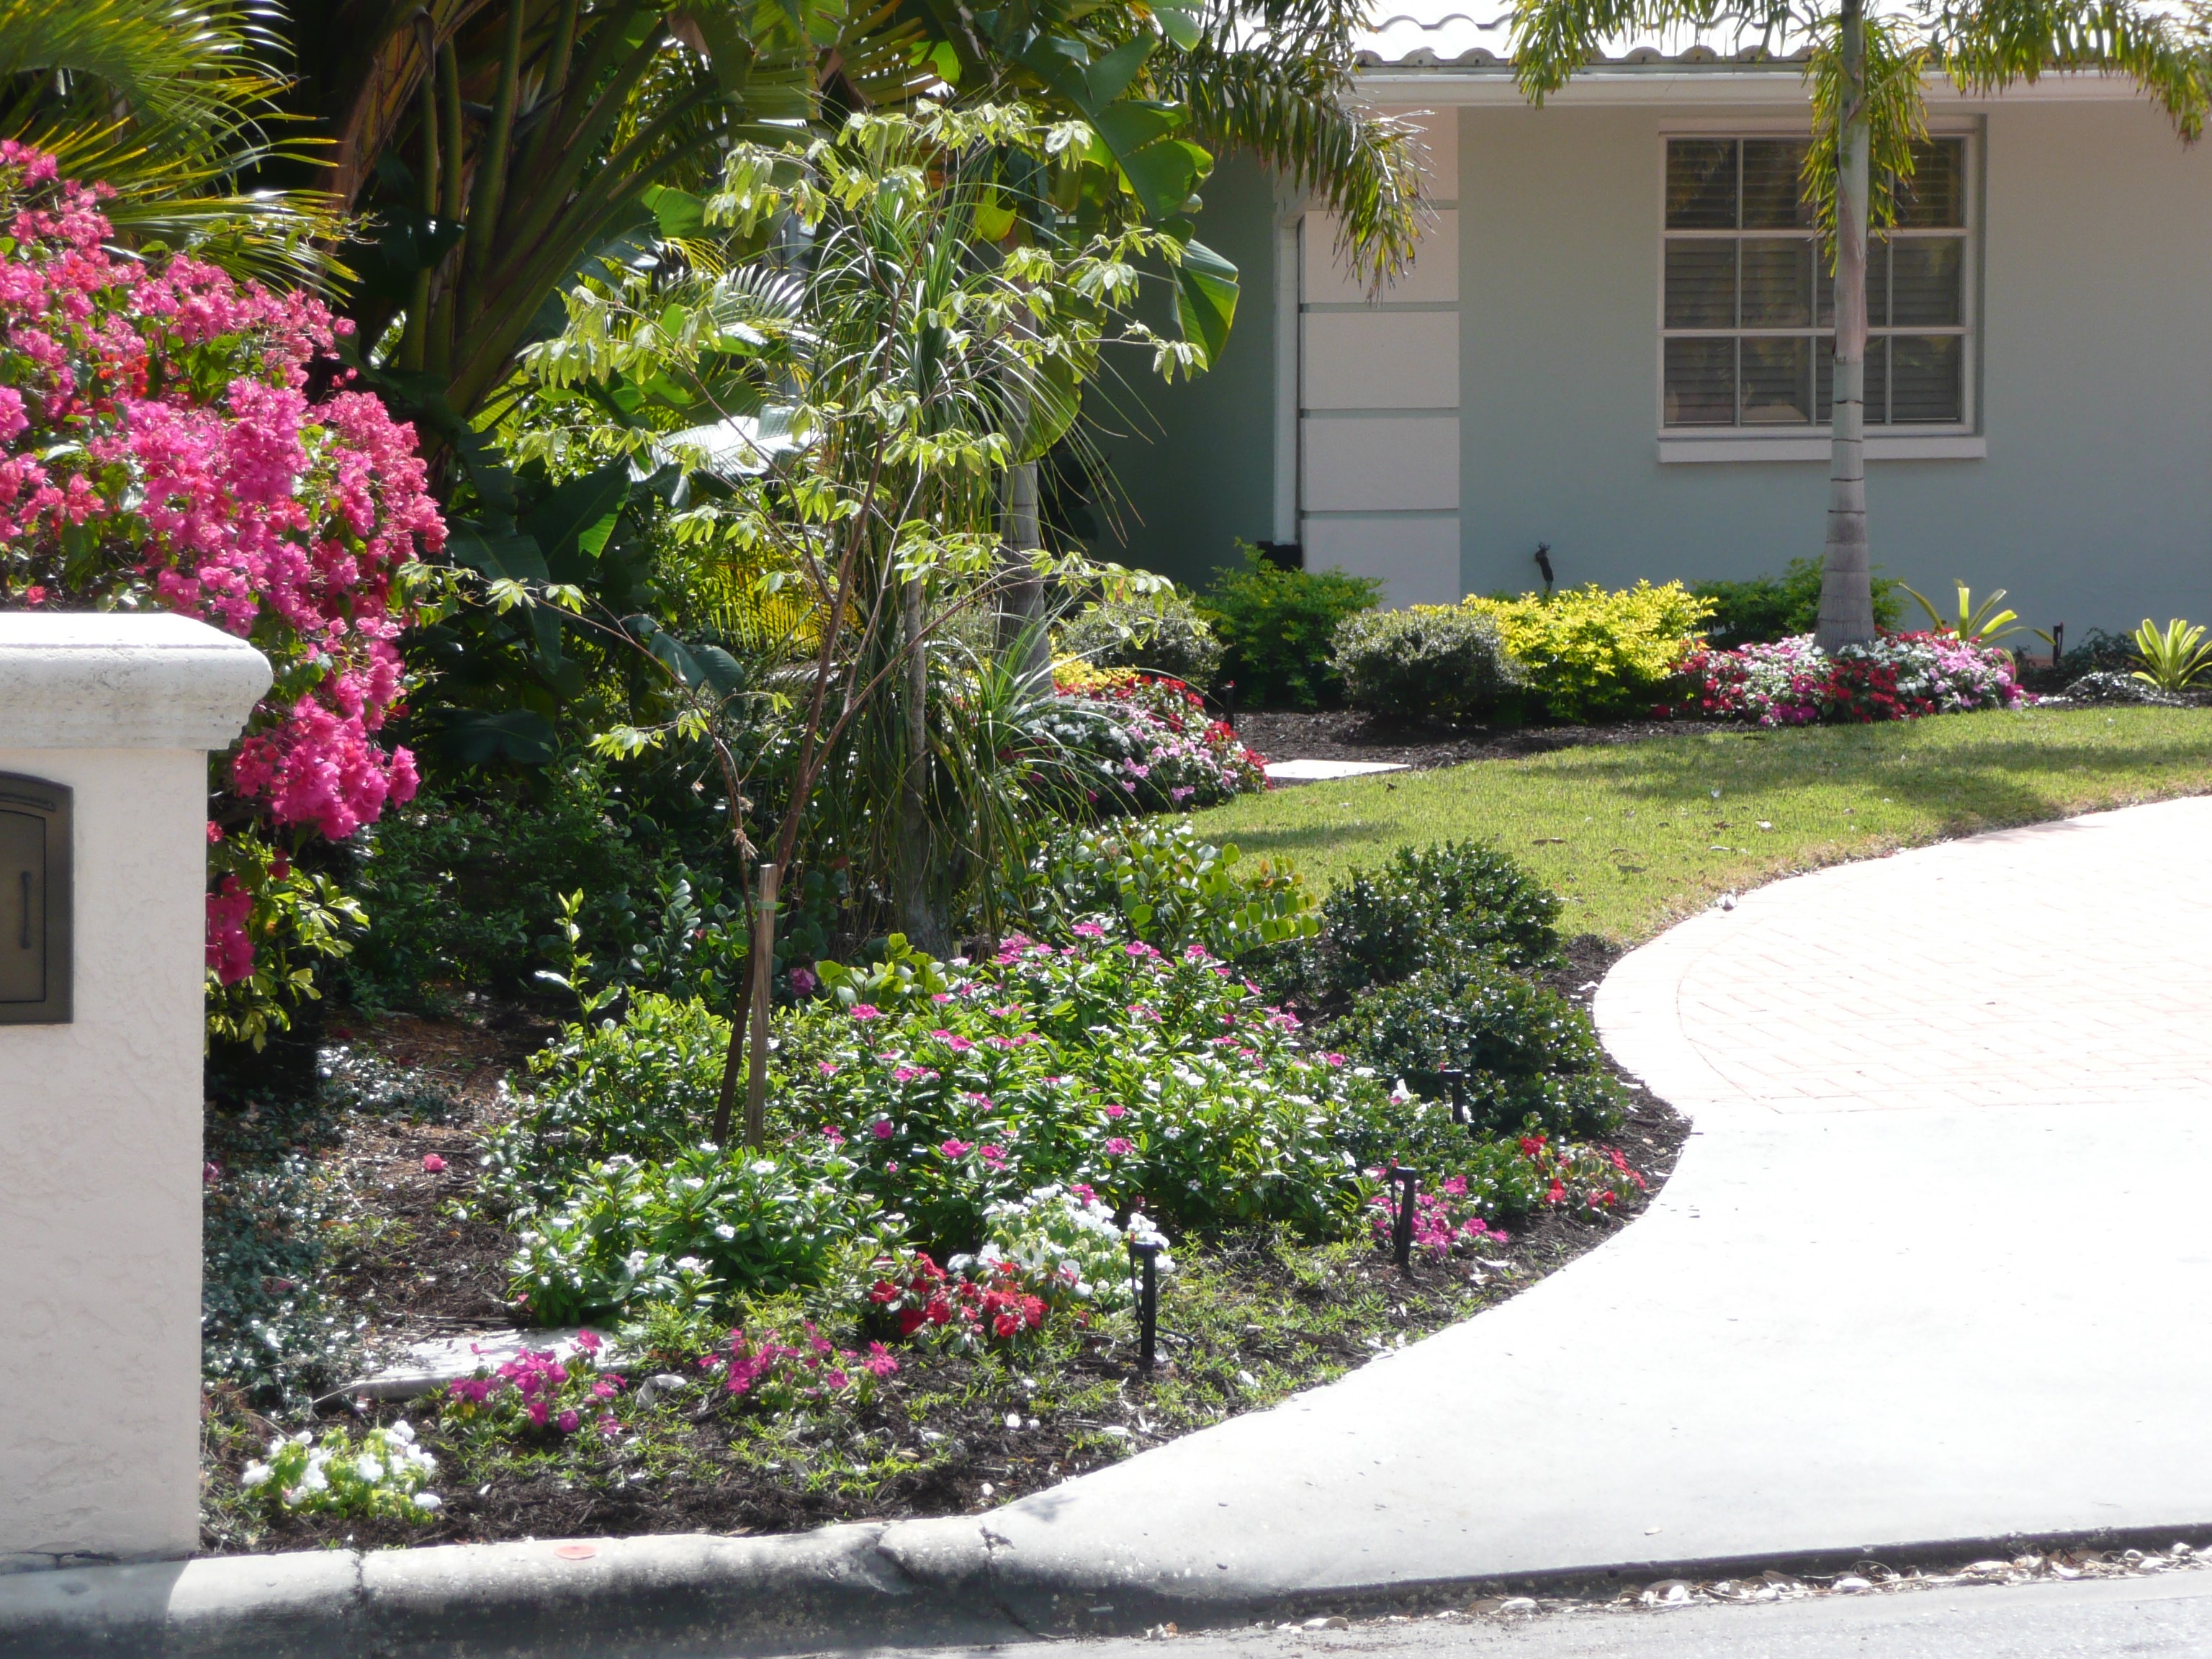 Smart Planning Is the Key to Low Maintenance Landscaping